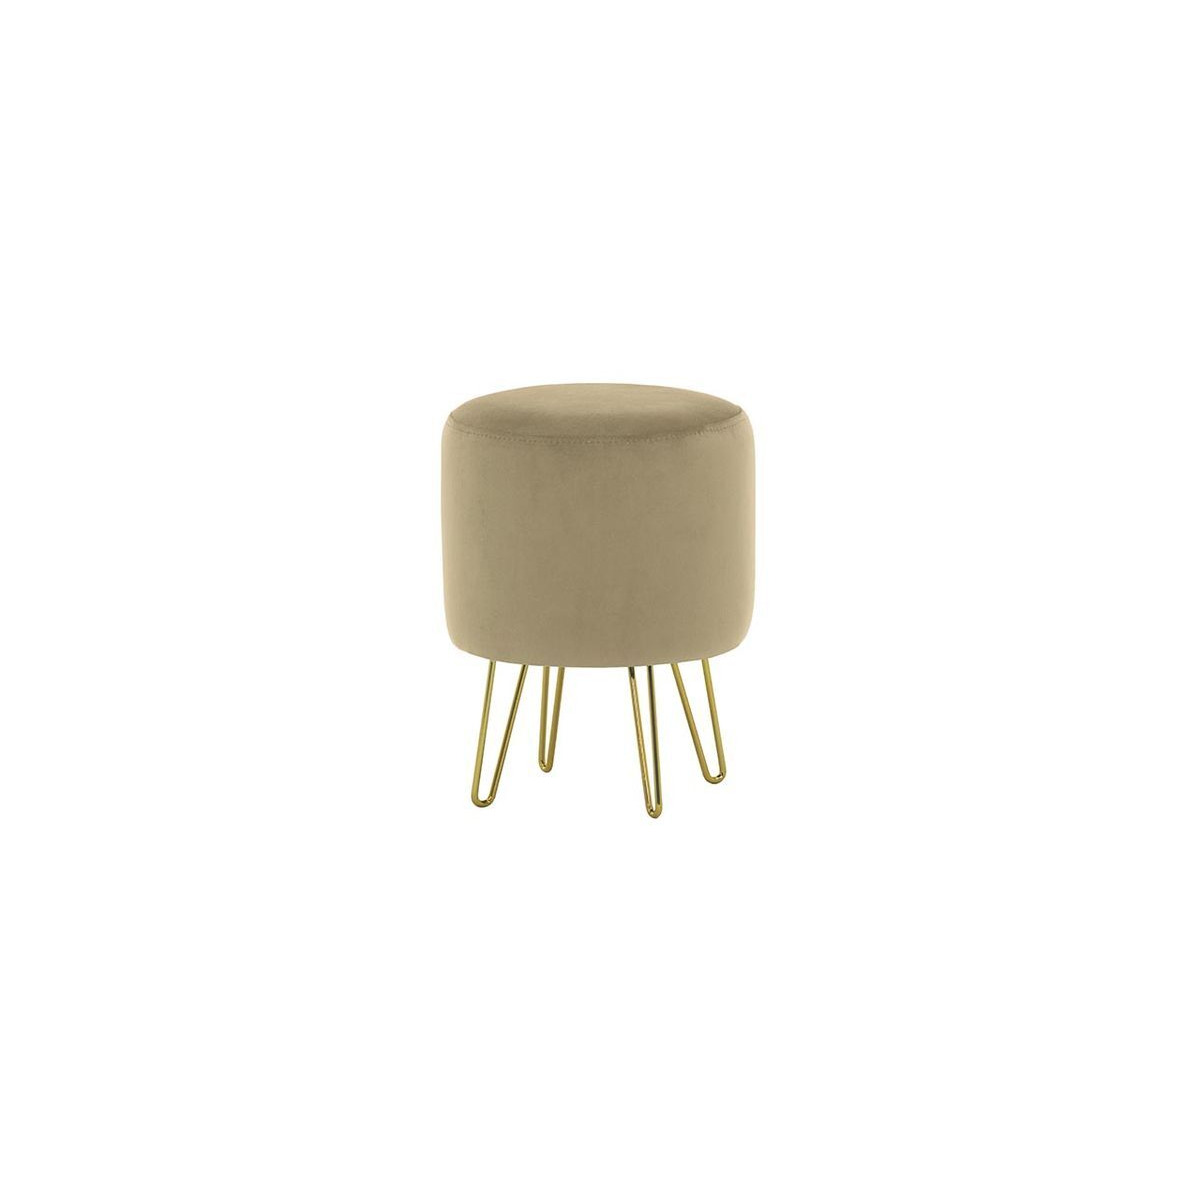 Flair Small Round Pouffe Metal Legs, mink - image 1